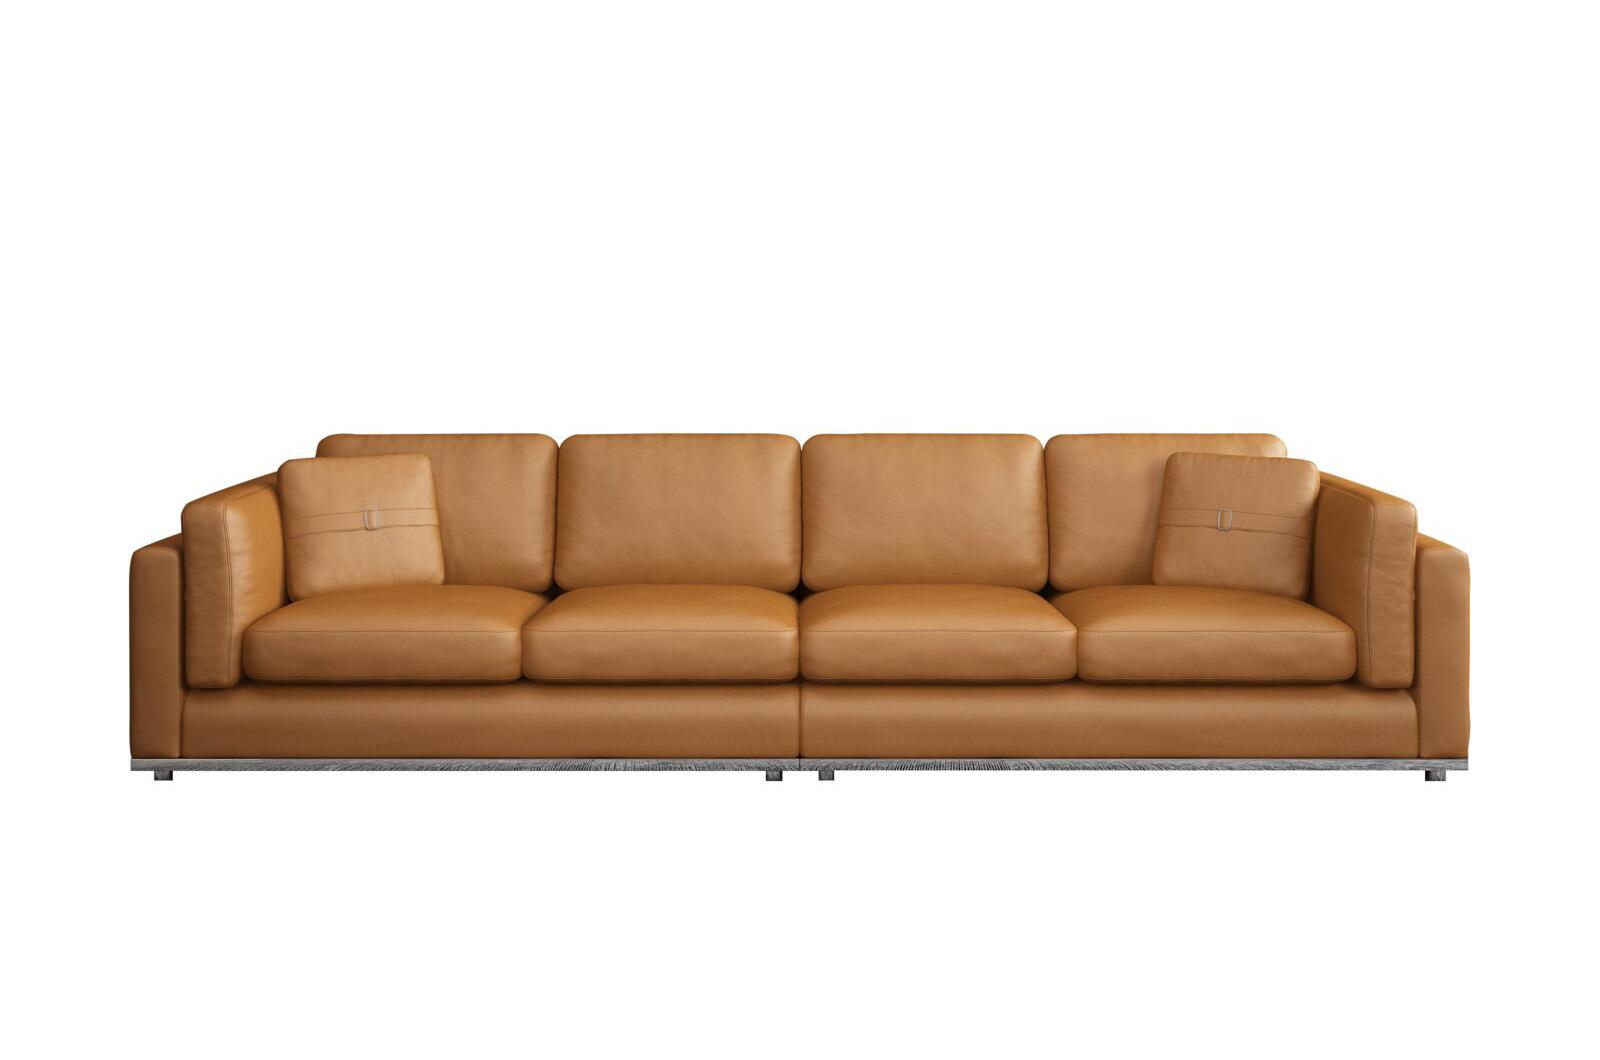 Contemporary, Modern Sofa PICASSO EF-25552-4S in Cognac Leather